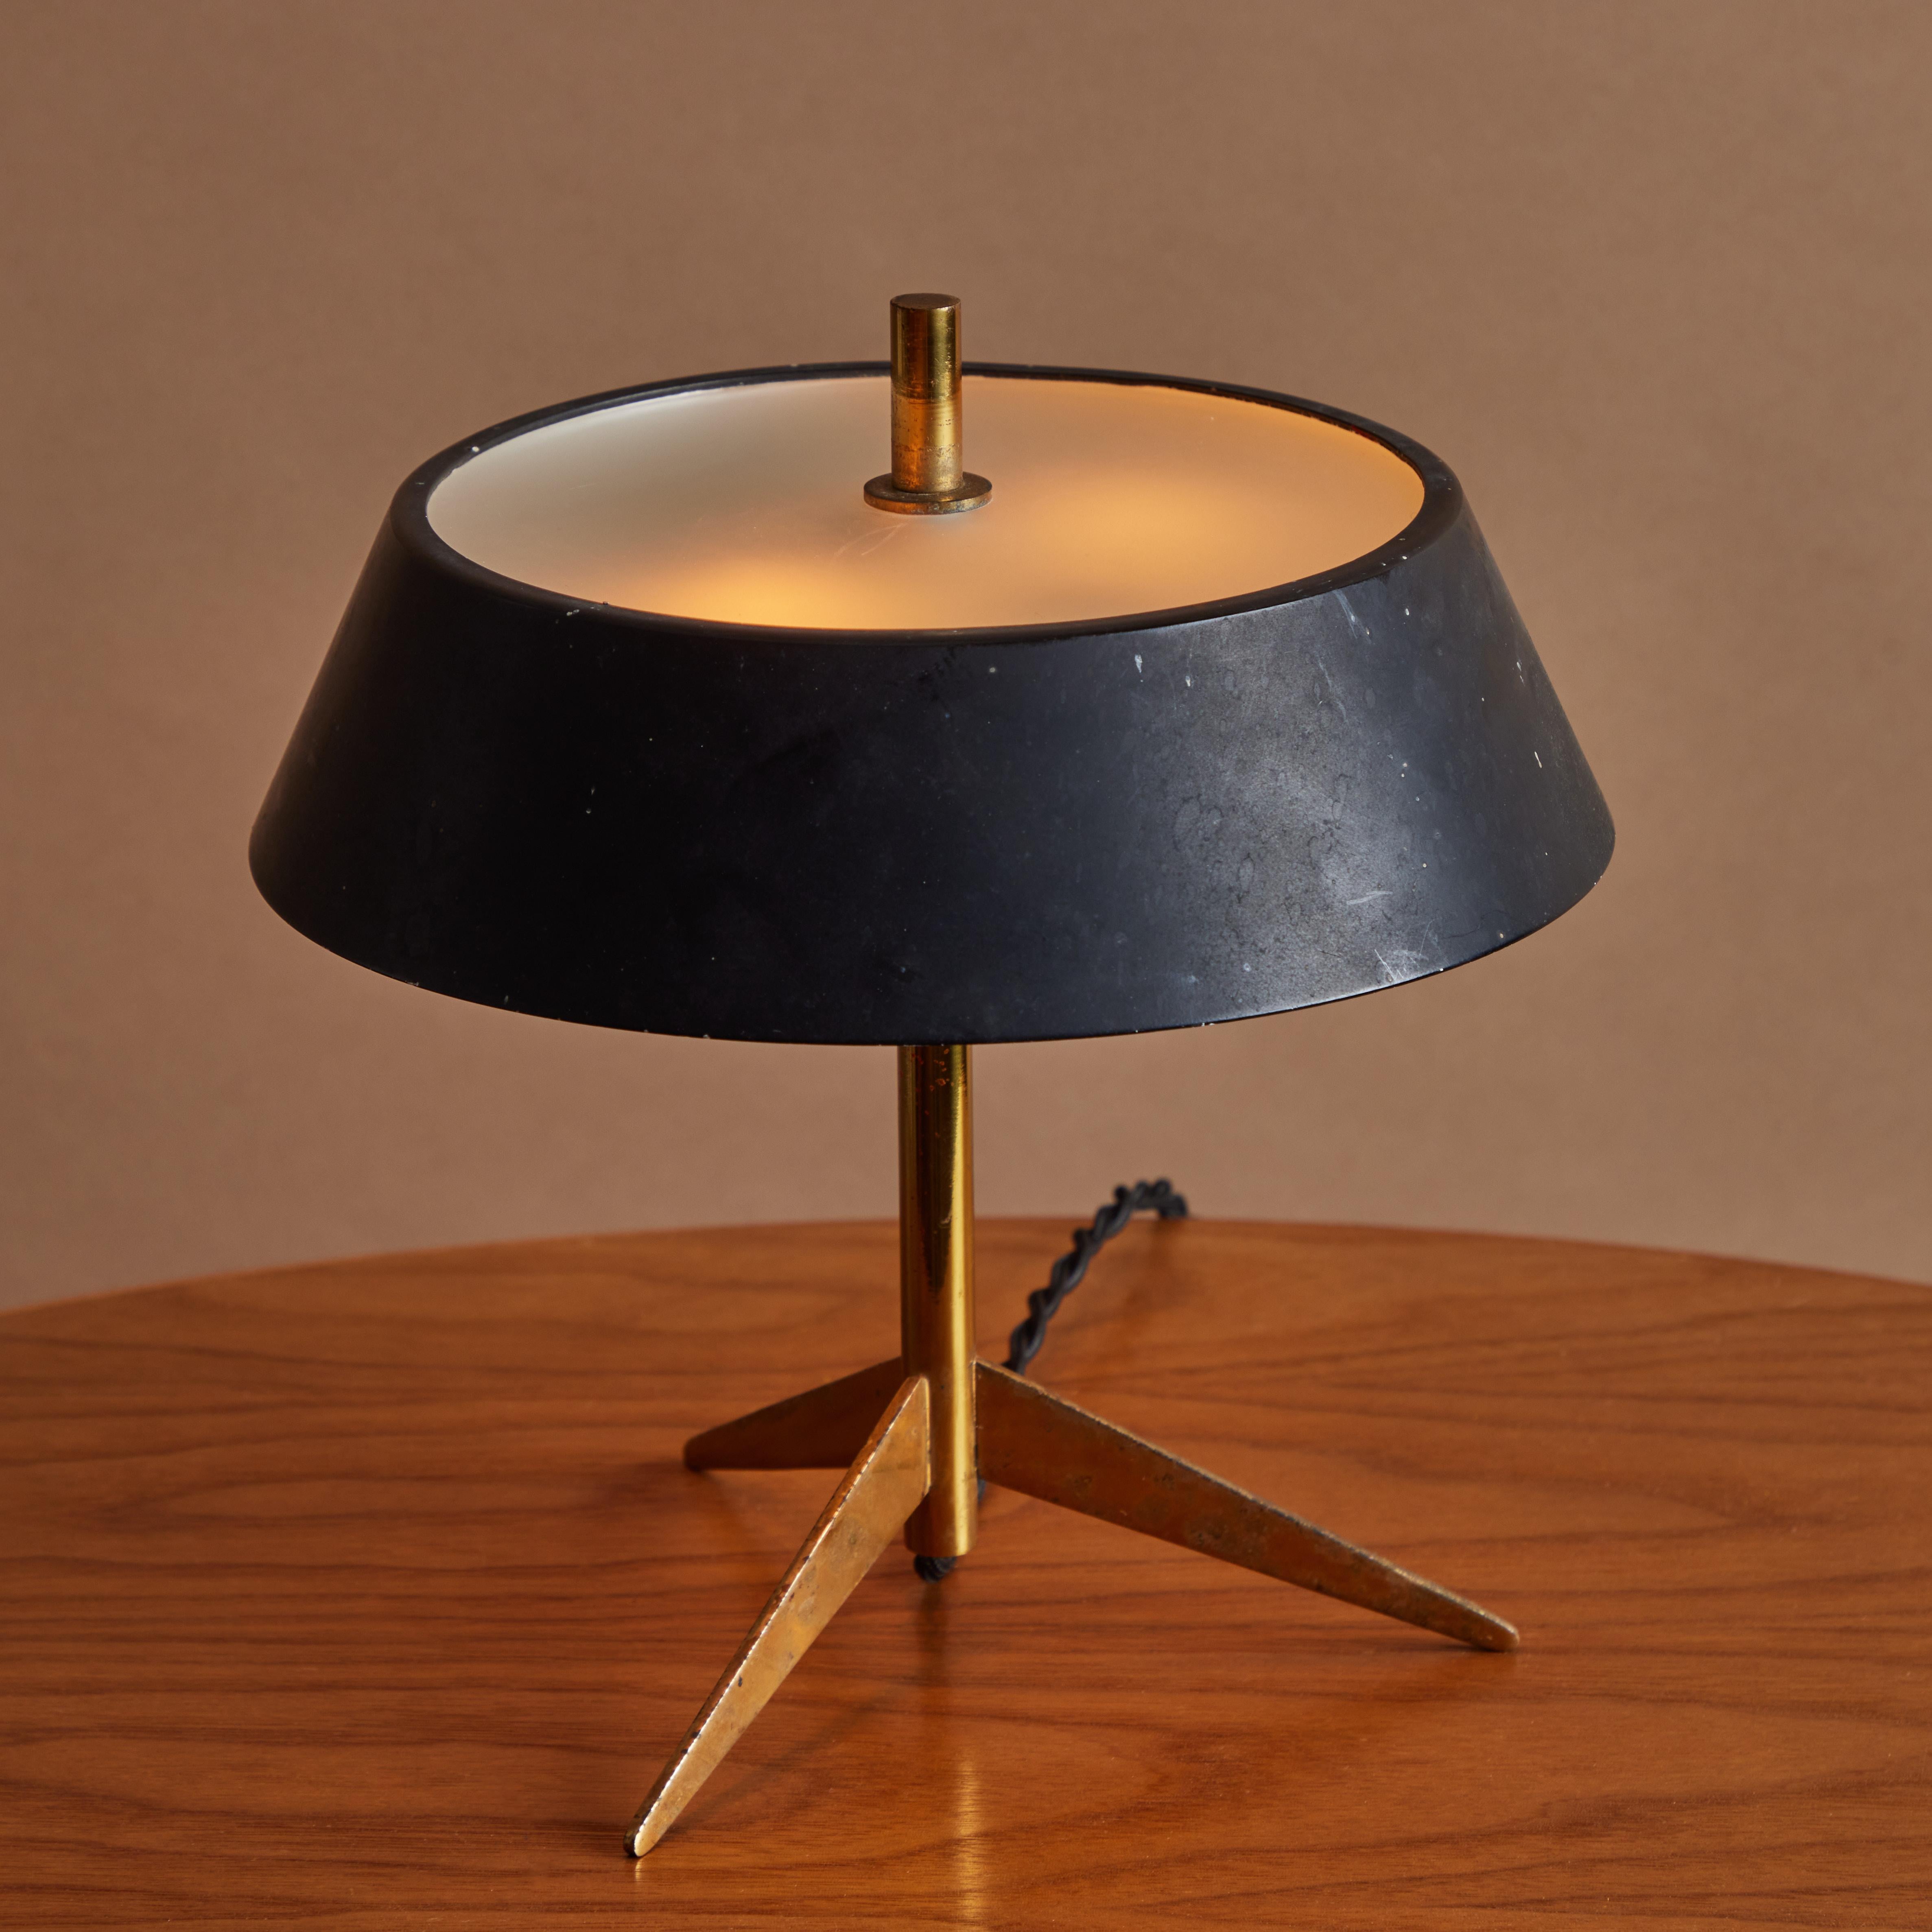 1960s Giuseppe Ostuni metal and glass tripod table lamp for O-Luce. An extremely rare and surprisingly versatile design executed in black painted metal and brass with an opaline glass diffuser by one of the most refined Italian designers of the